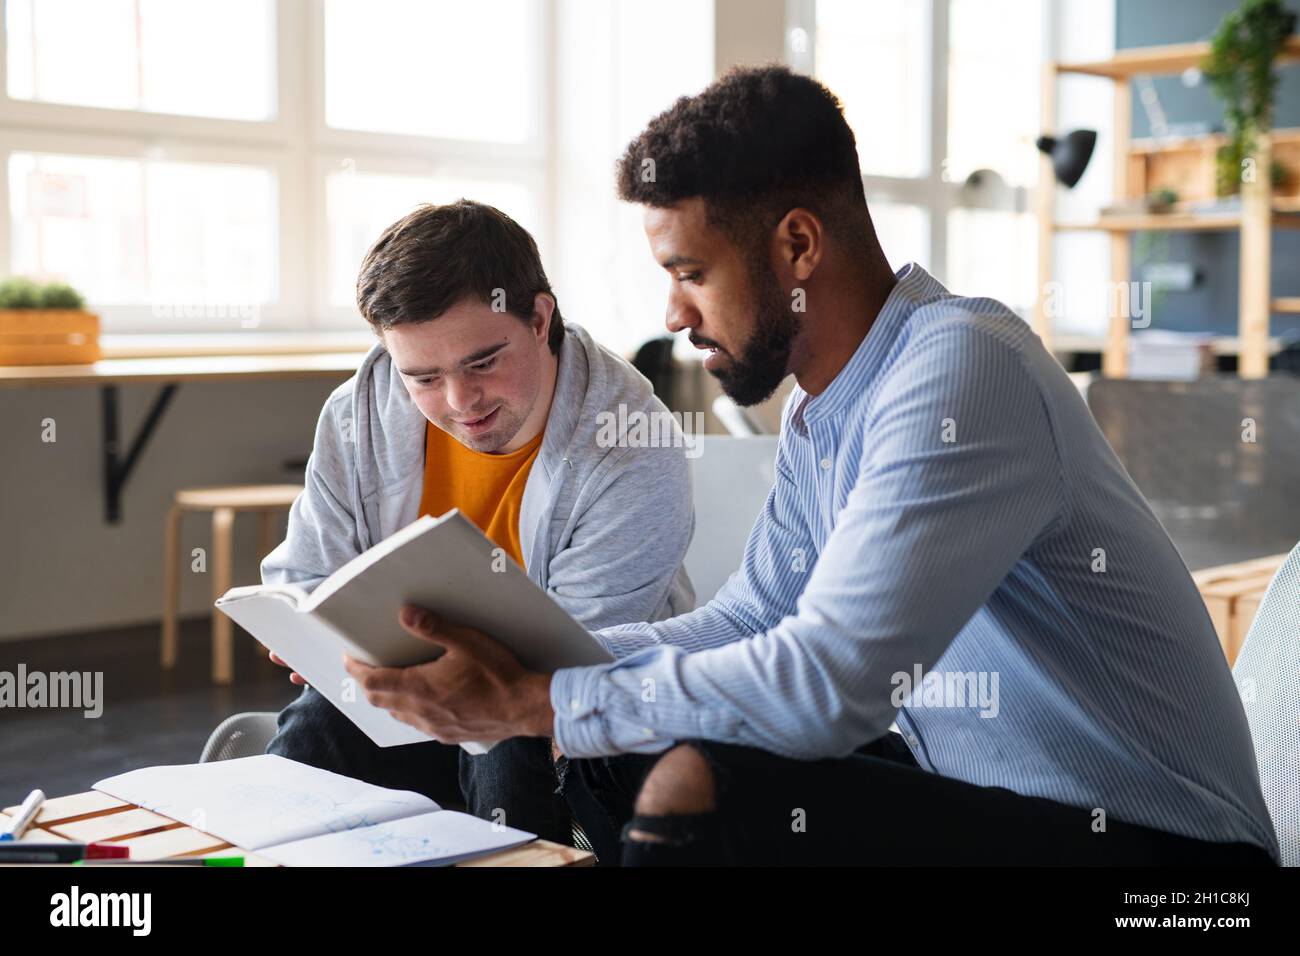 Young happy man with Down syndrome and his tutor studying indoors at school. Stock Photo